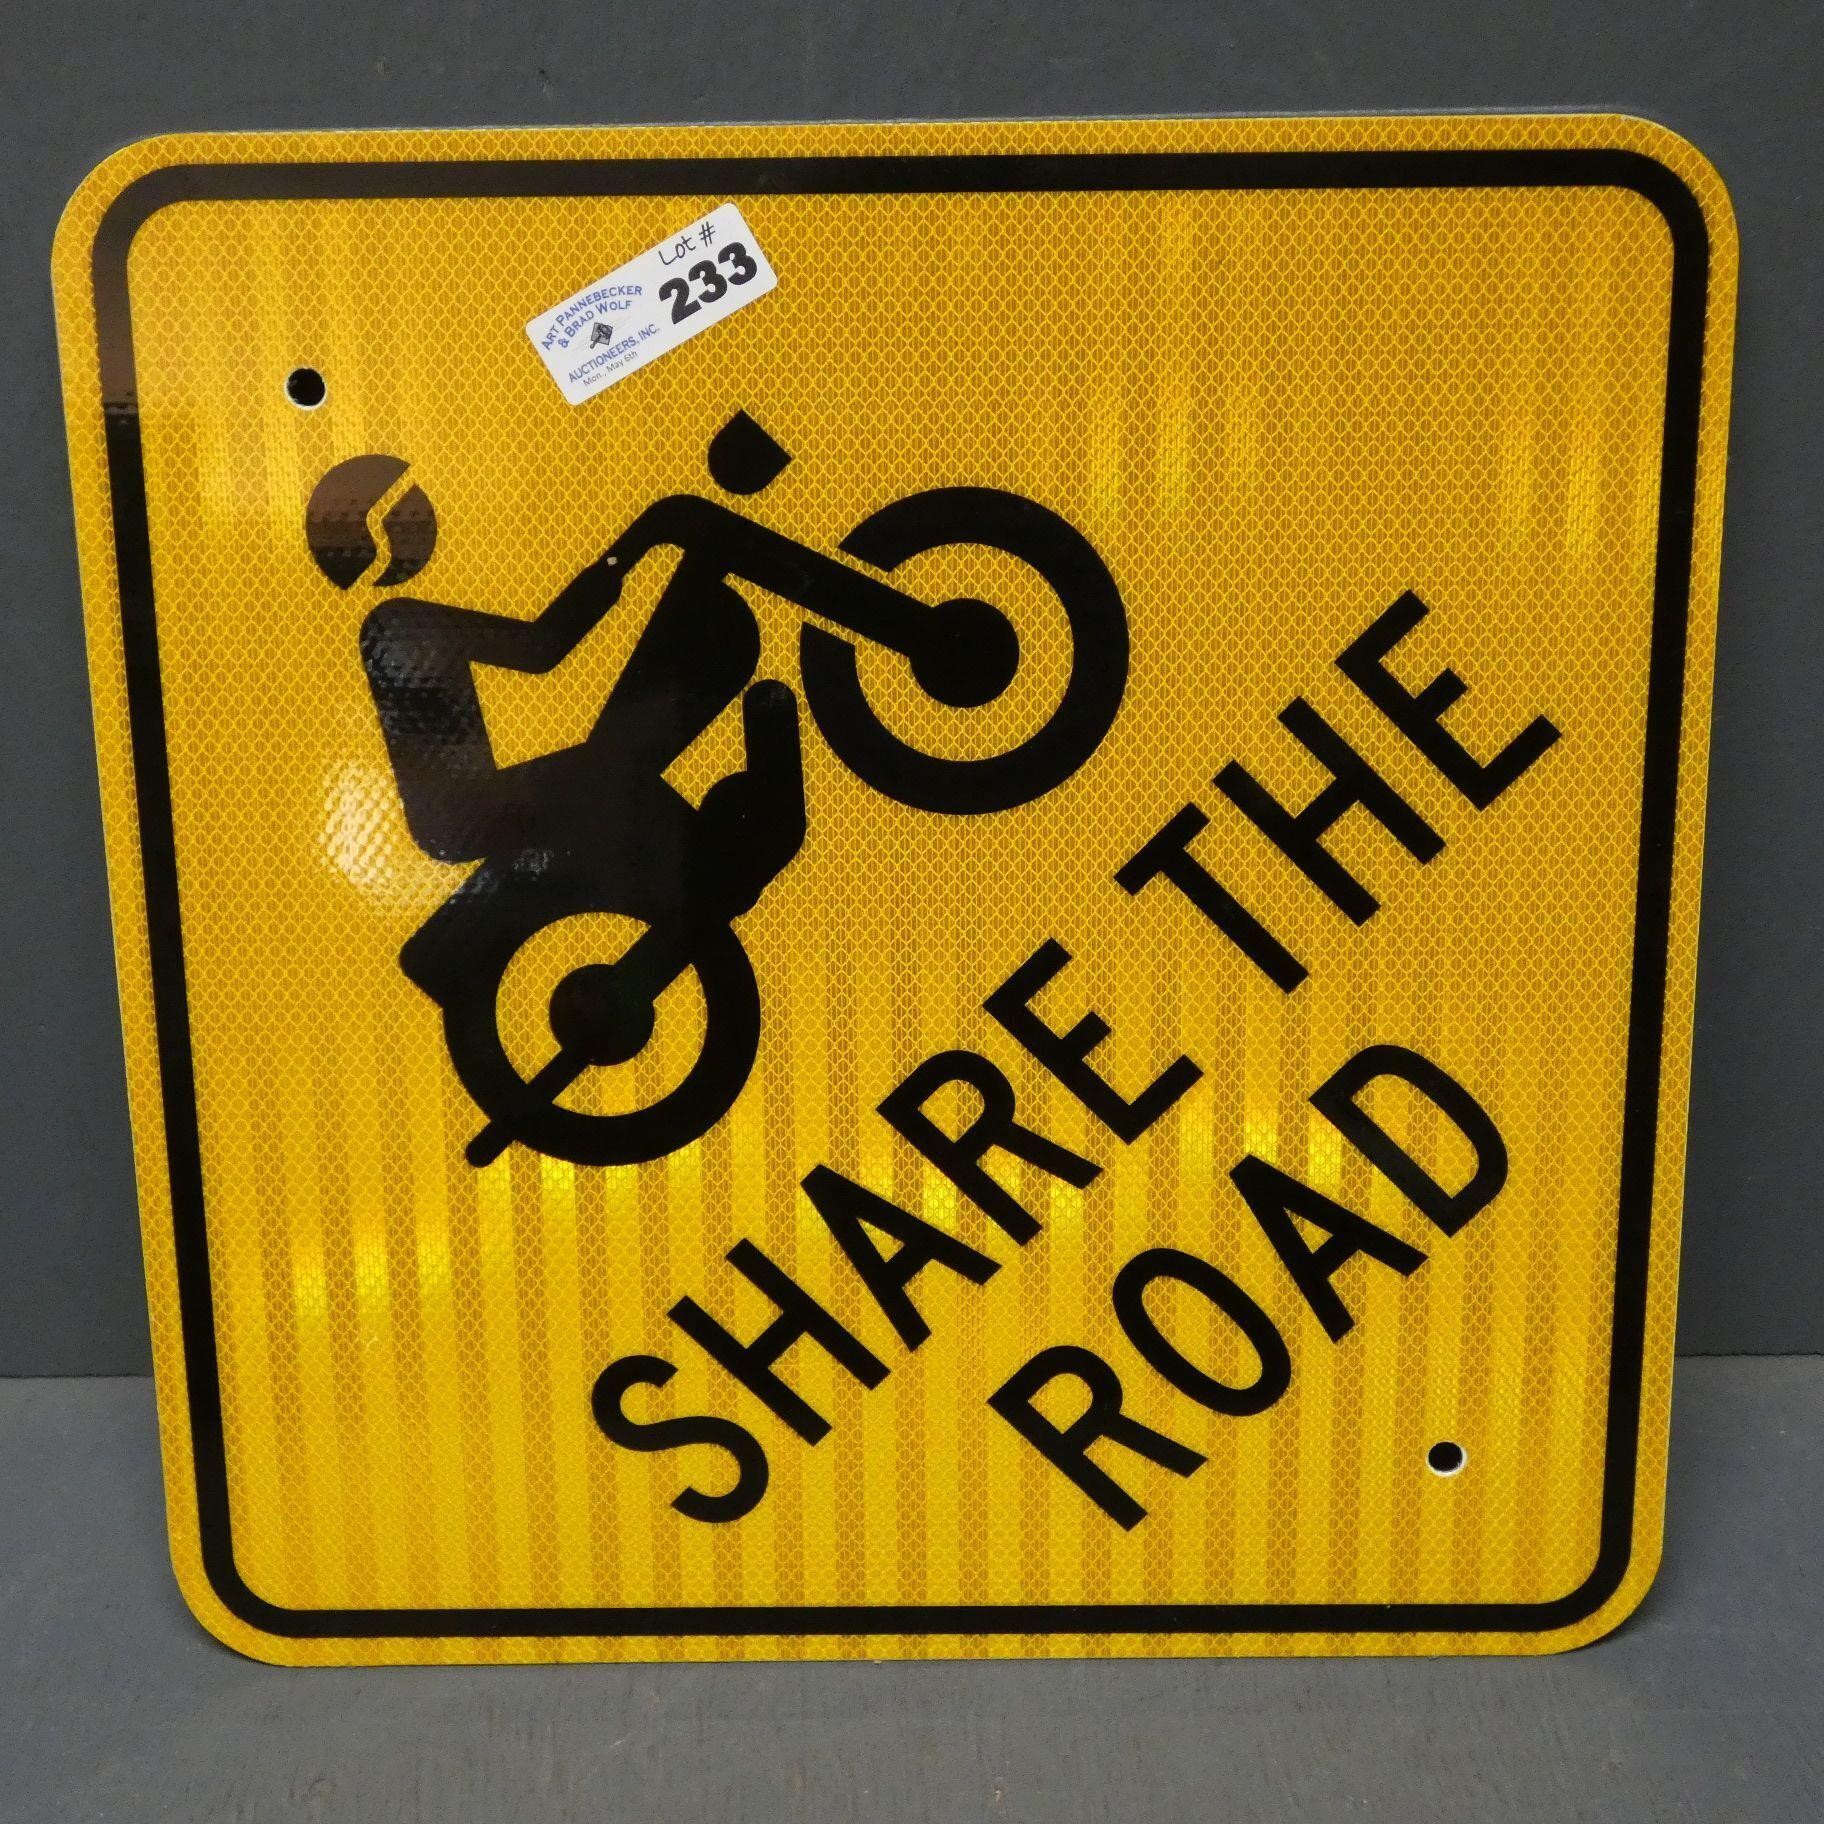 Share the Road Metal Road Sign